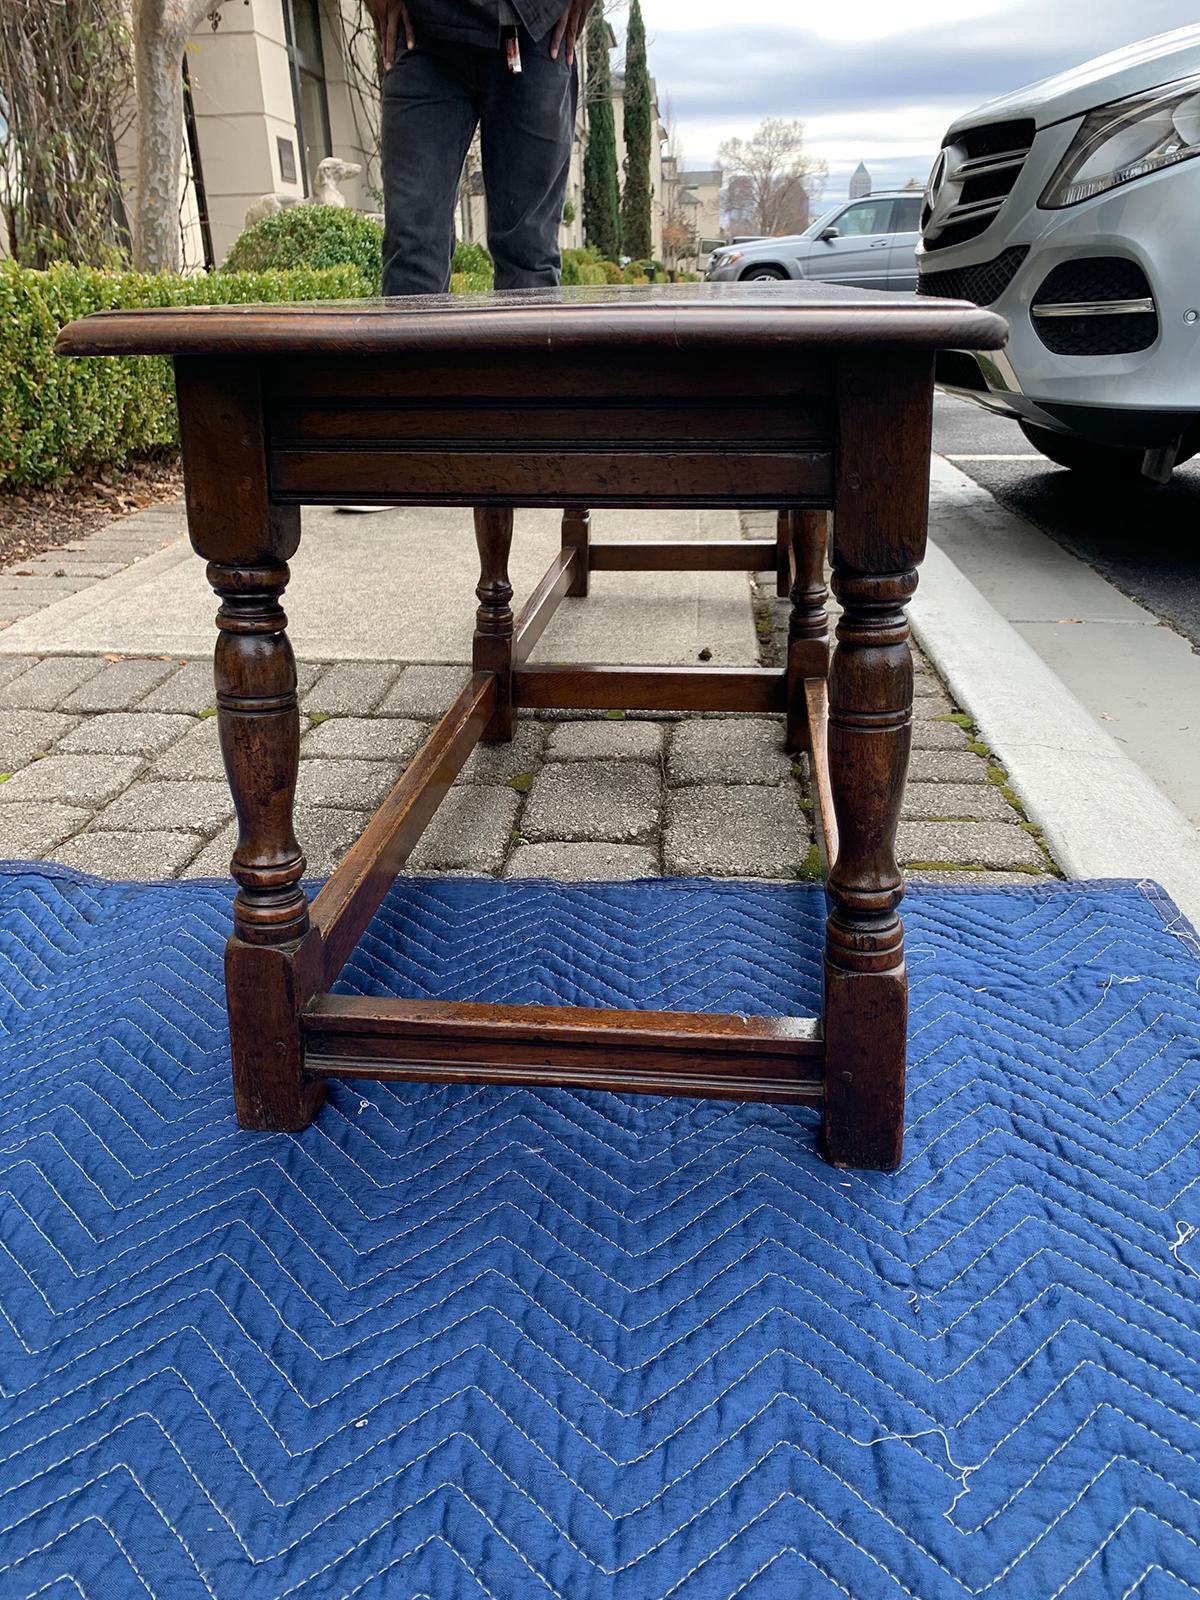 Long English Wood Coffee Table or Joint Stool Bench, circa 1900s-1930s 4